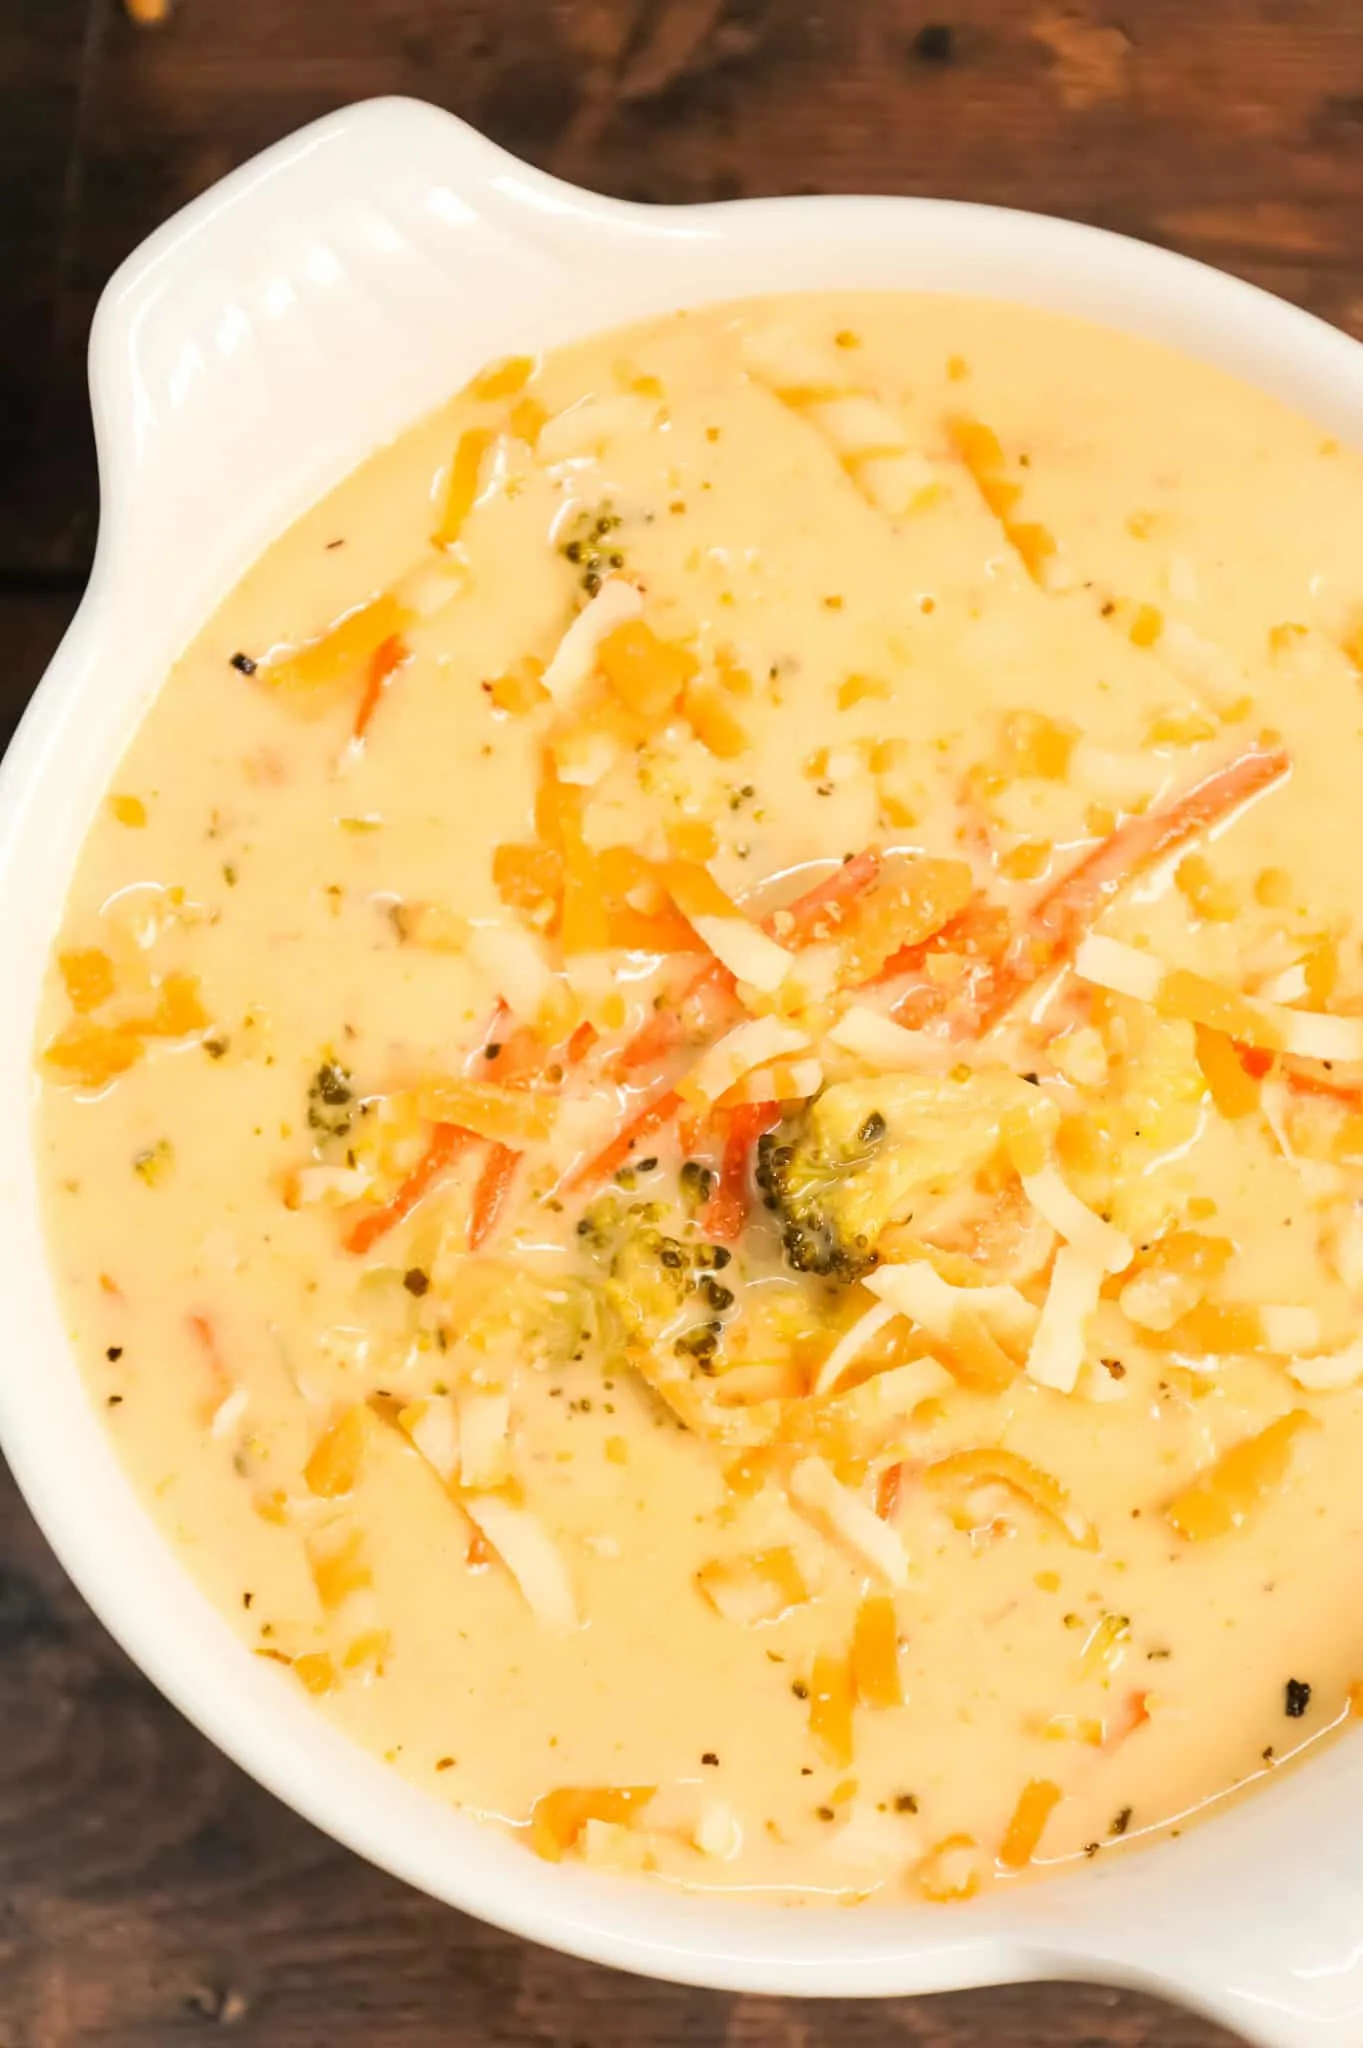 Crock Pot Broccoli Cheddar Soup is a hearty cream soup recipe loaded with broccoli florets, carrots and cheddar cheese.